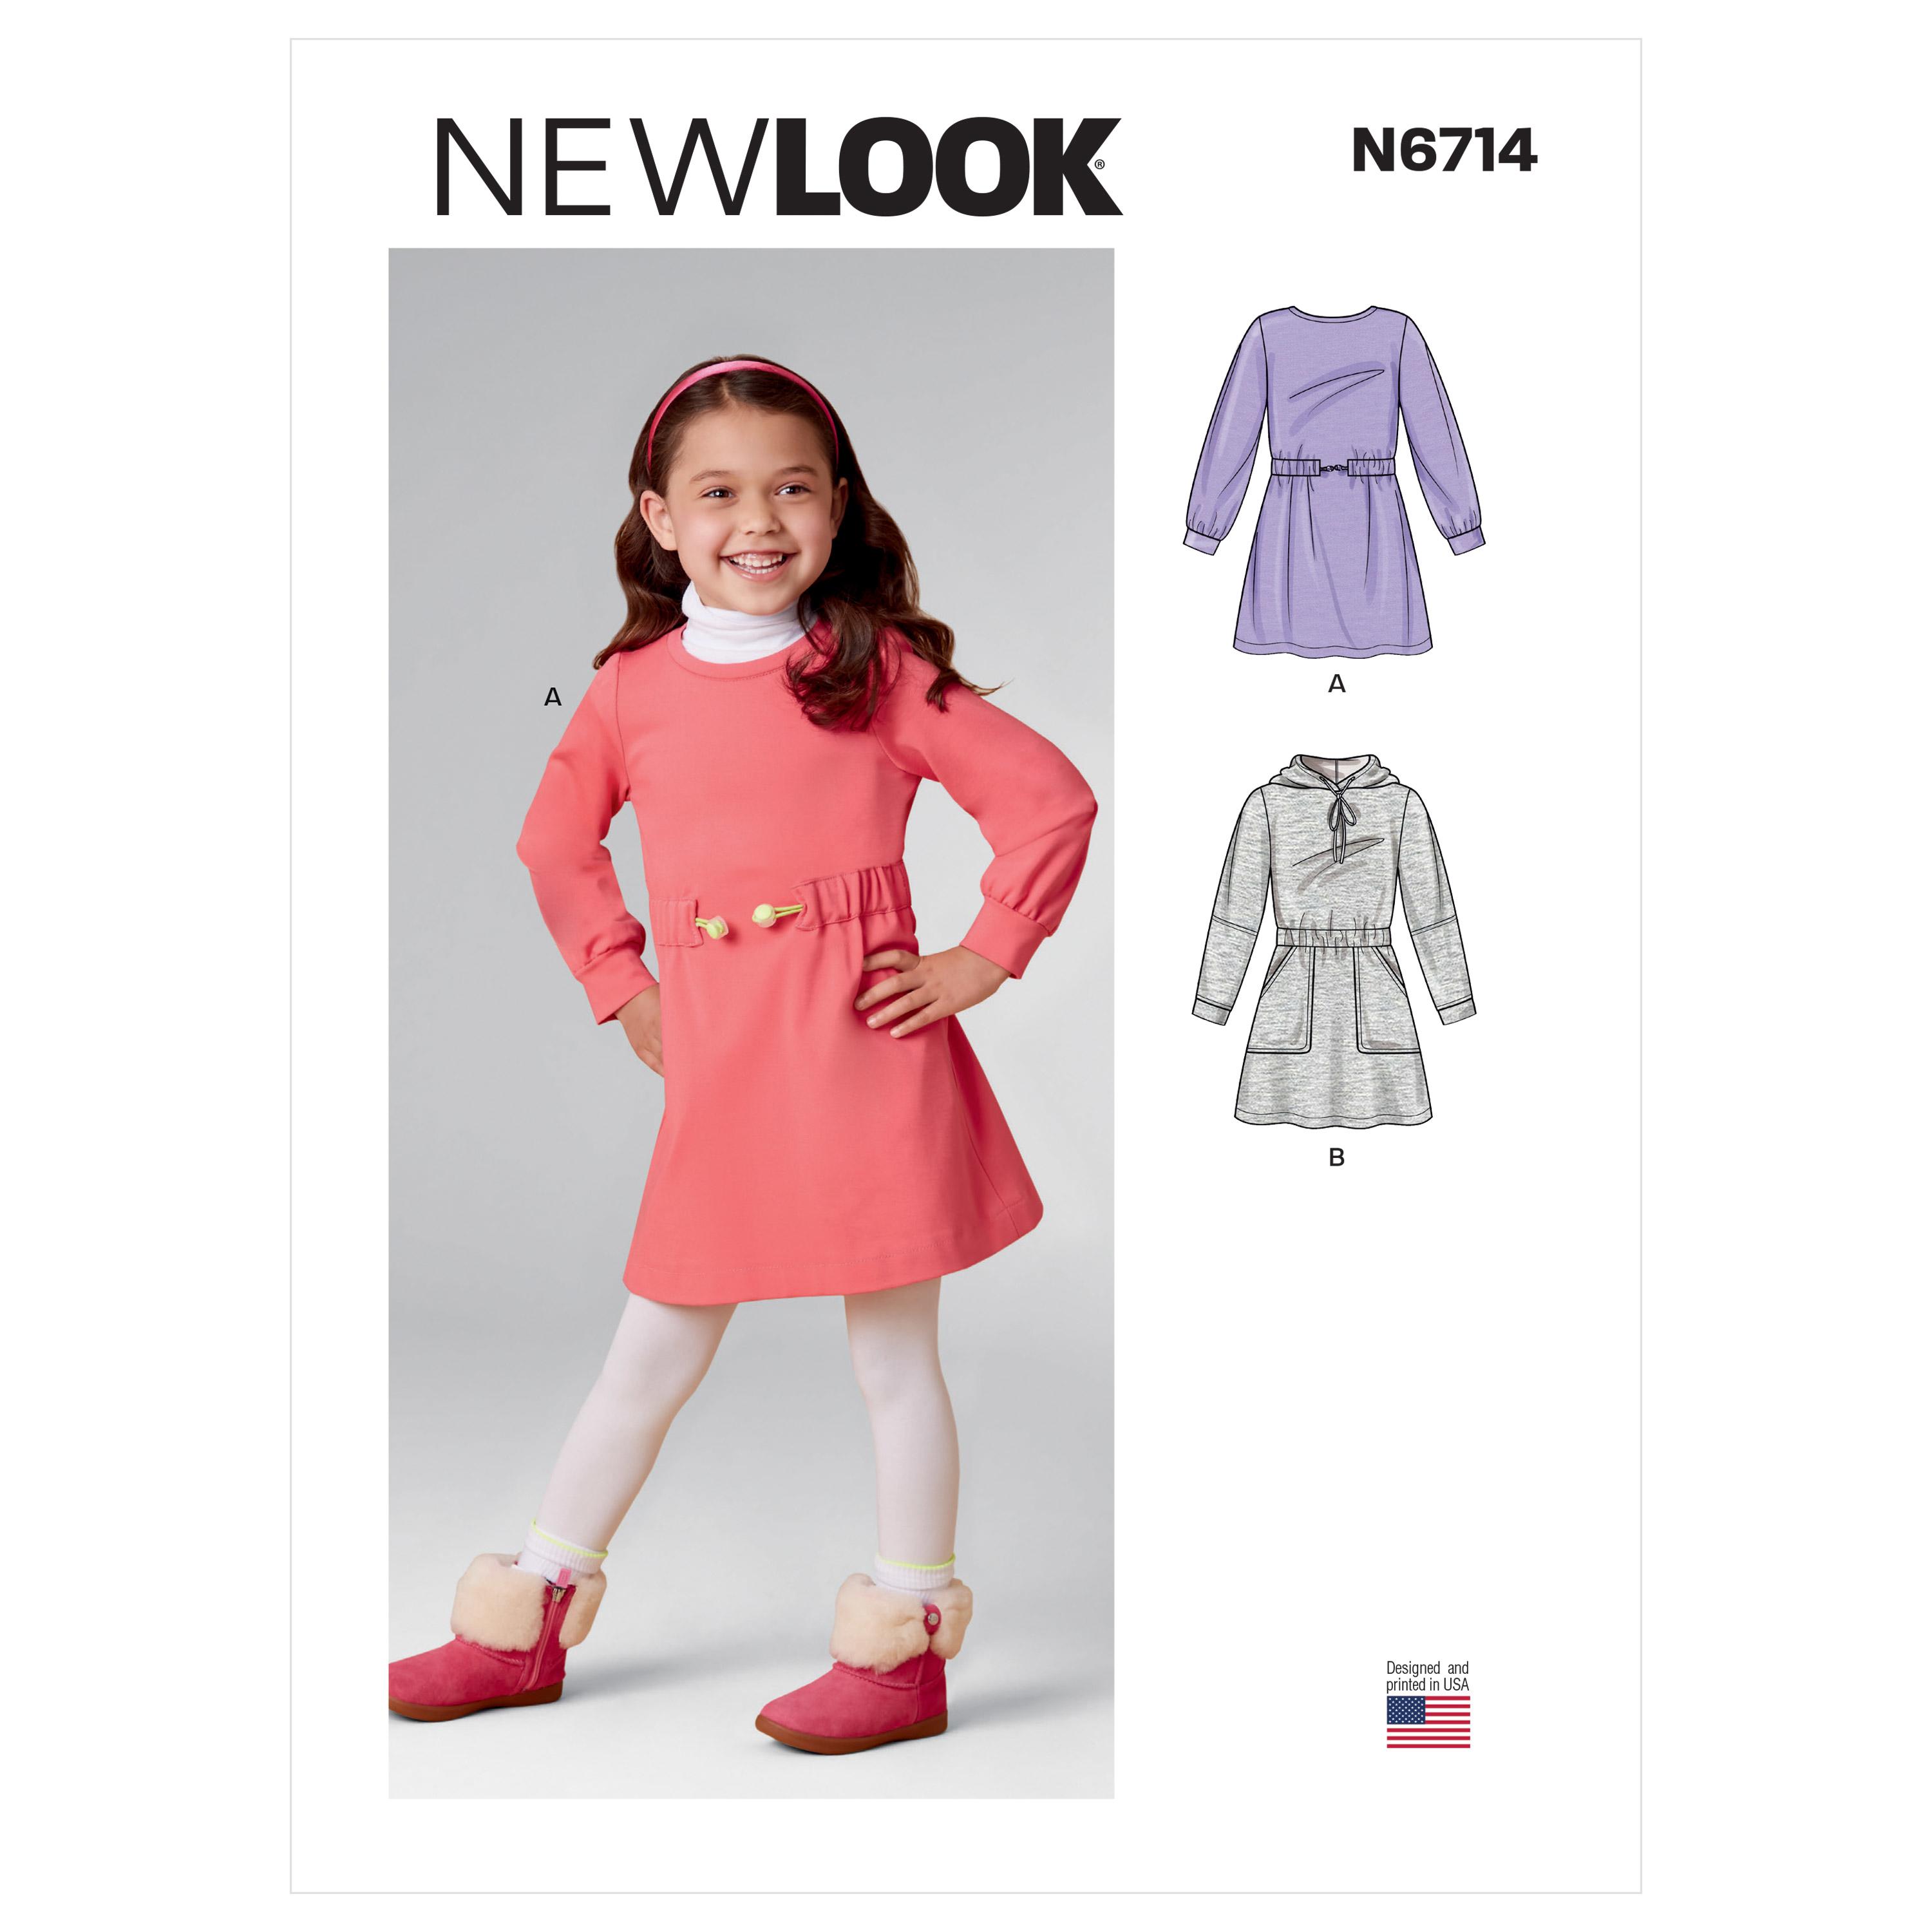 New Look Sewing Pattern N6714 Children's Dresses